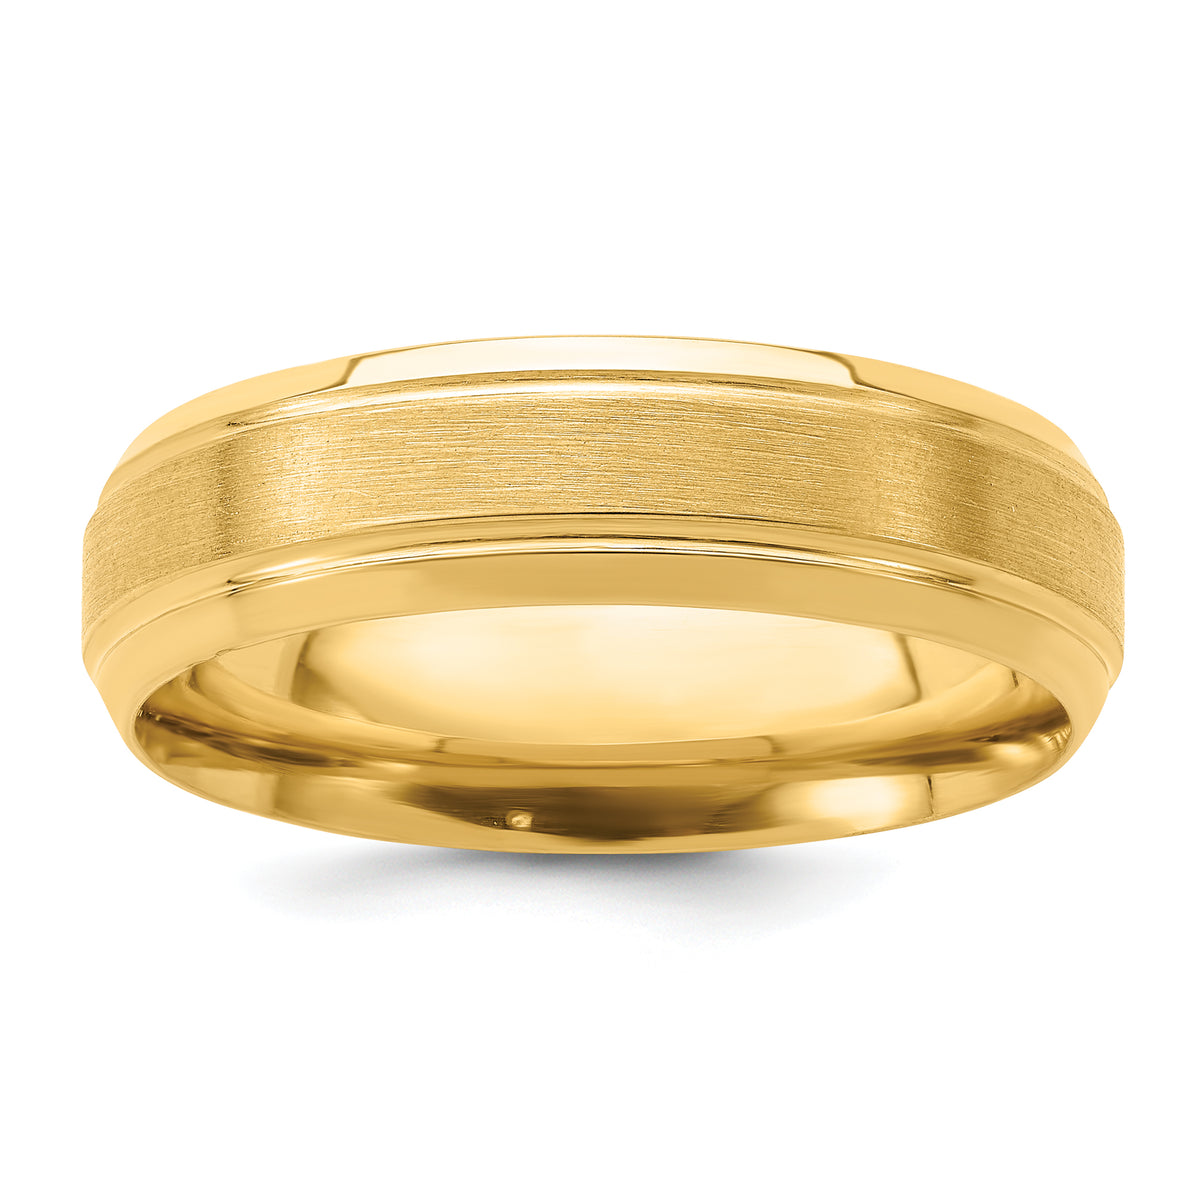 14k Yellow Gold 6mm Standard Weight Comfort Fit Brushed Satin/Polished Line Edge Wedding Band Size 13.5